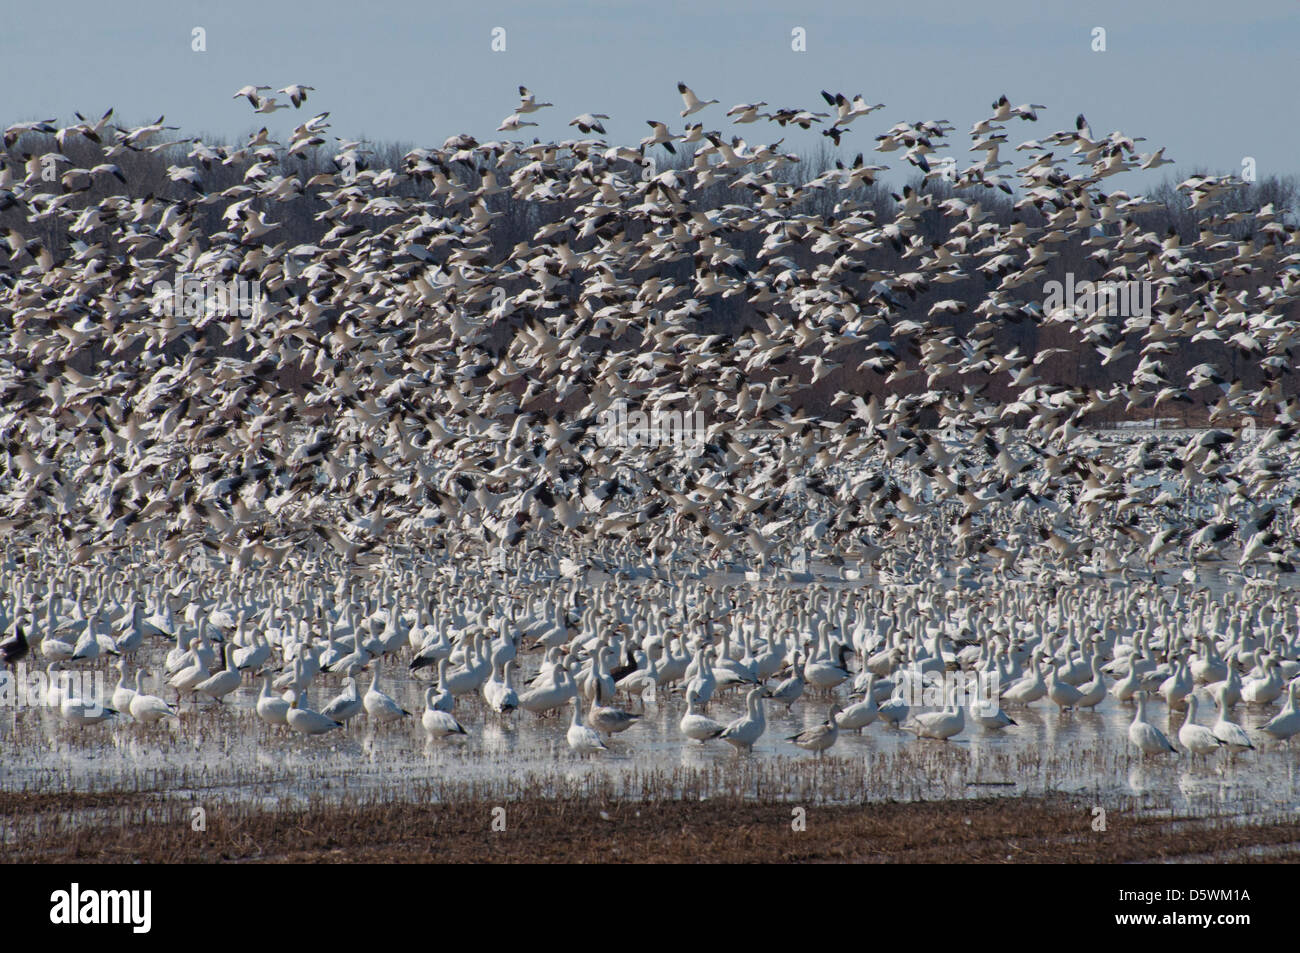 Snow Geese taking off during their spring migration. Stock Photo